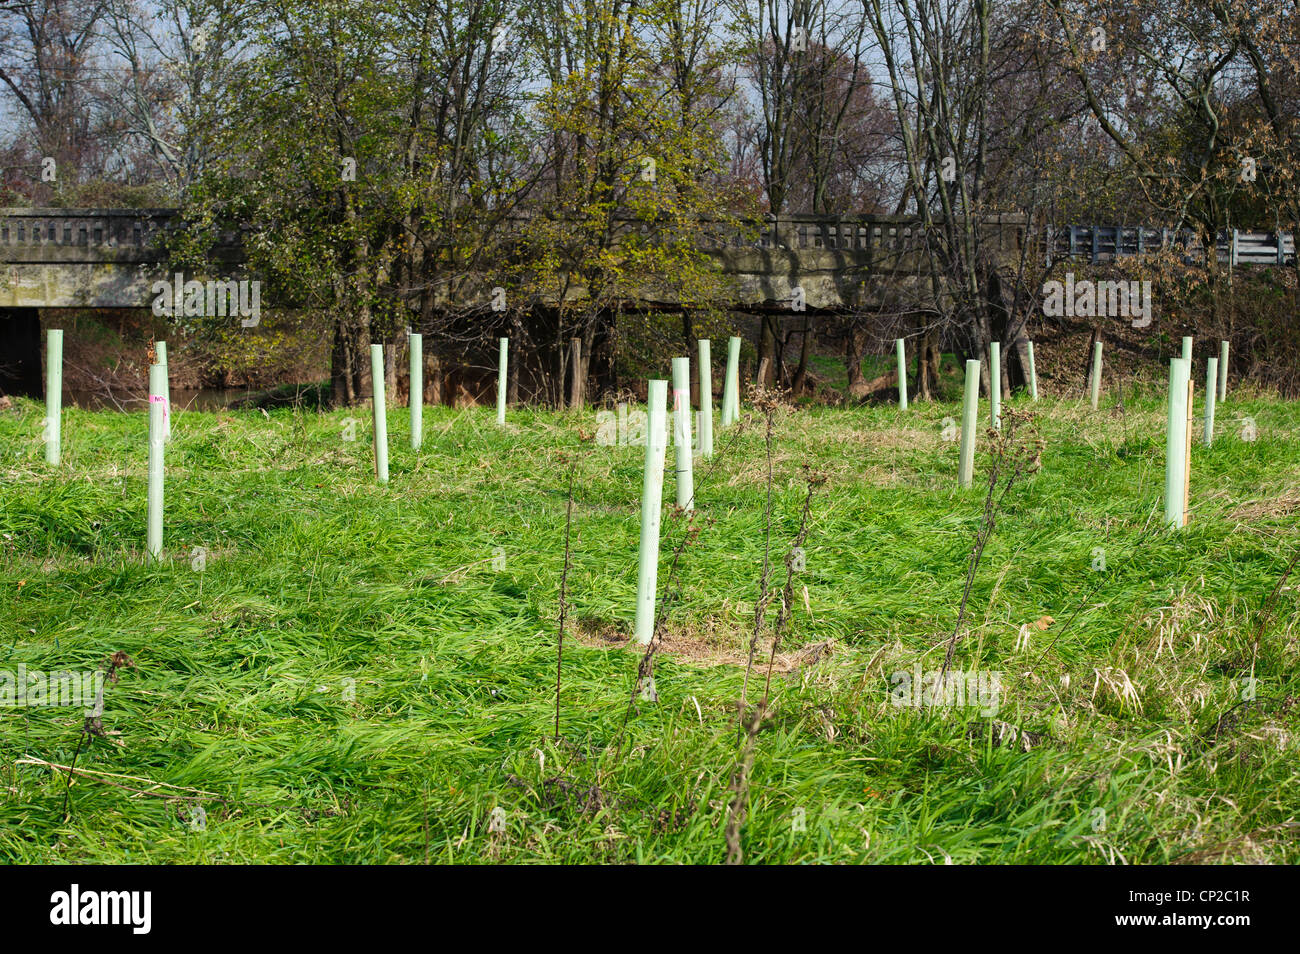 CONSERVATION RESERVE ENHANCEMENT PROGRAM (CREP)PLANTED TREES IN PROTECTIVE TUBES FOR STREAM BANK ENHANCEMENT Stock Photo